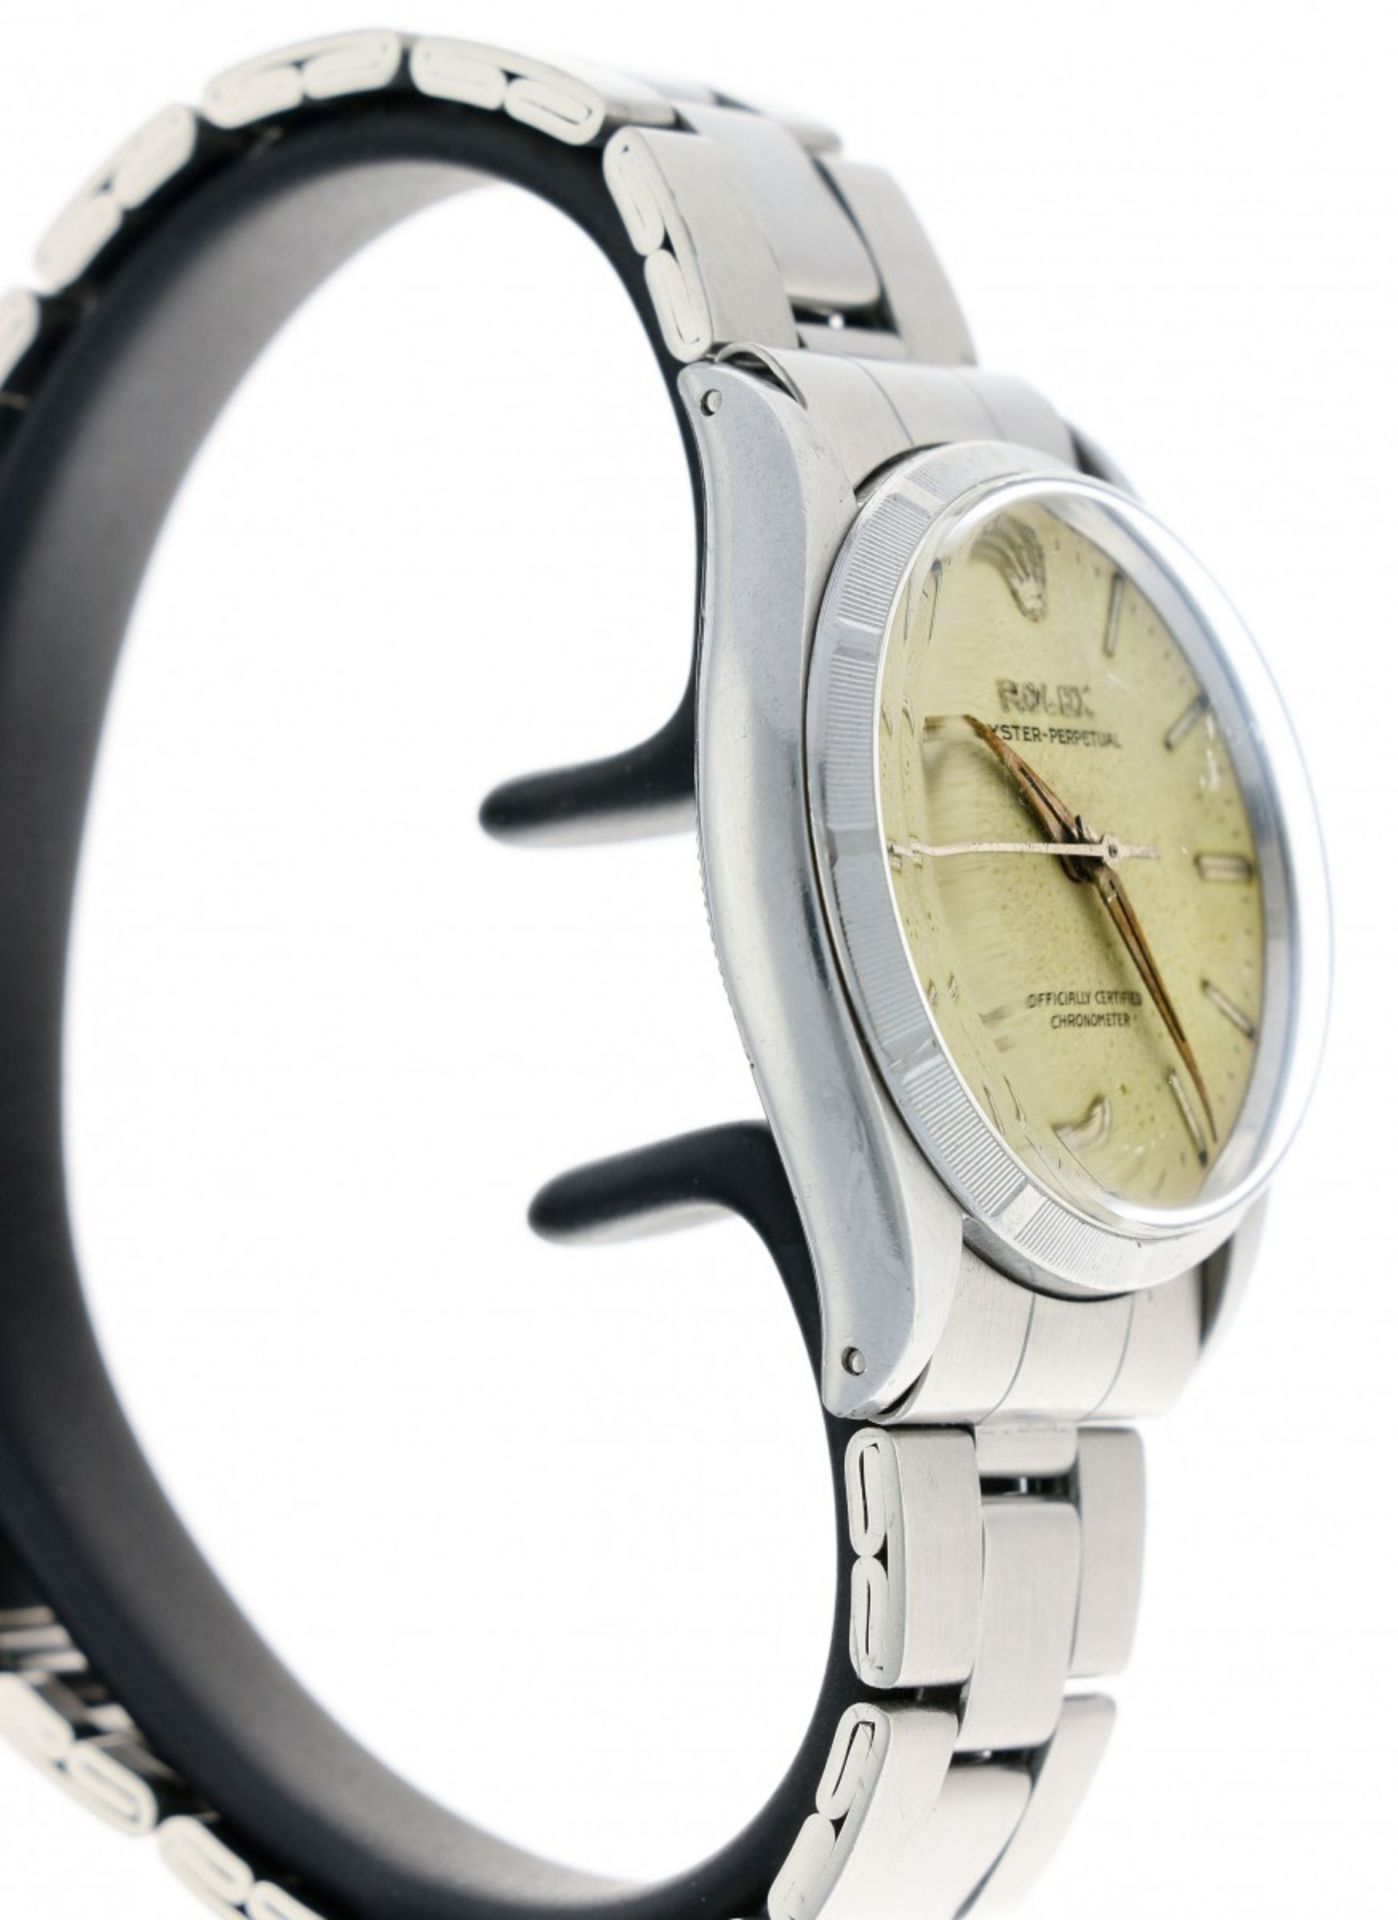 Rolex Oyster Perpetual 6565 - Men's watch - ca. 1958 - Image 4 of 7